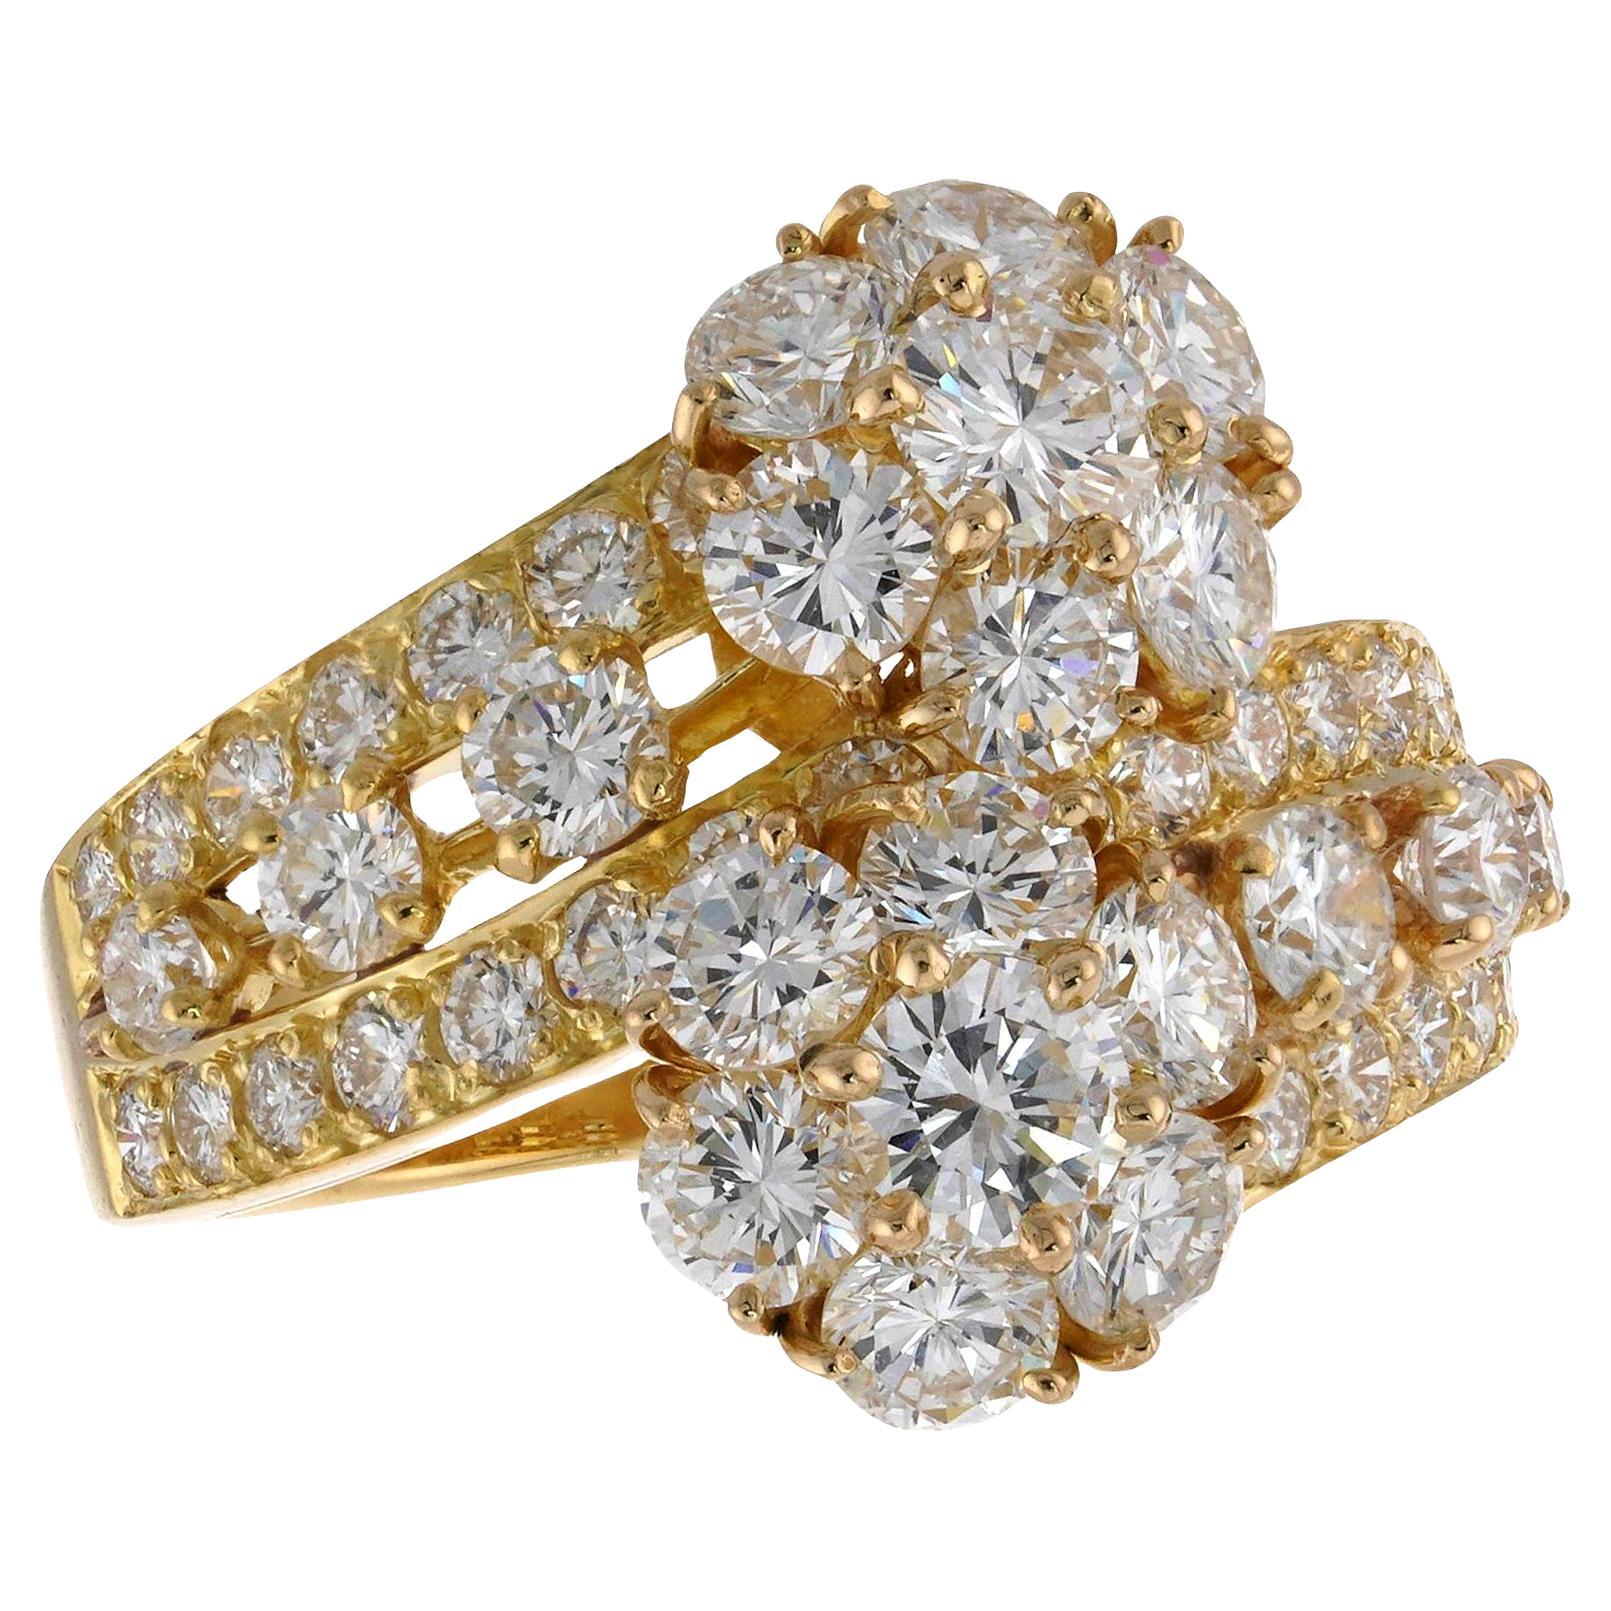 VAN CLEEF & ARPELS Snowflake 18k Yellow Gold Diamond Ring Size 5 For Sale